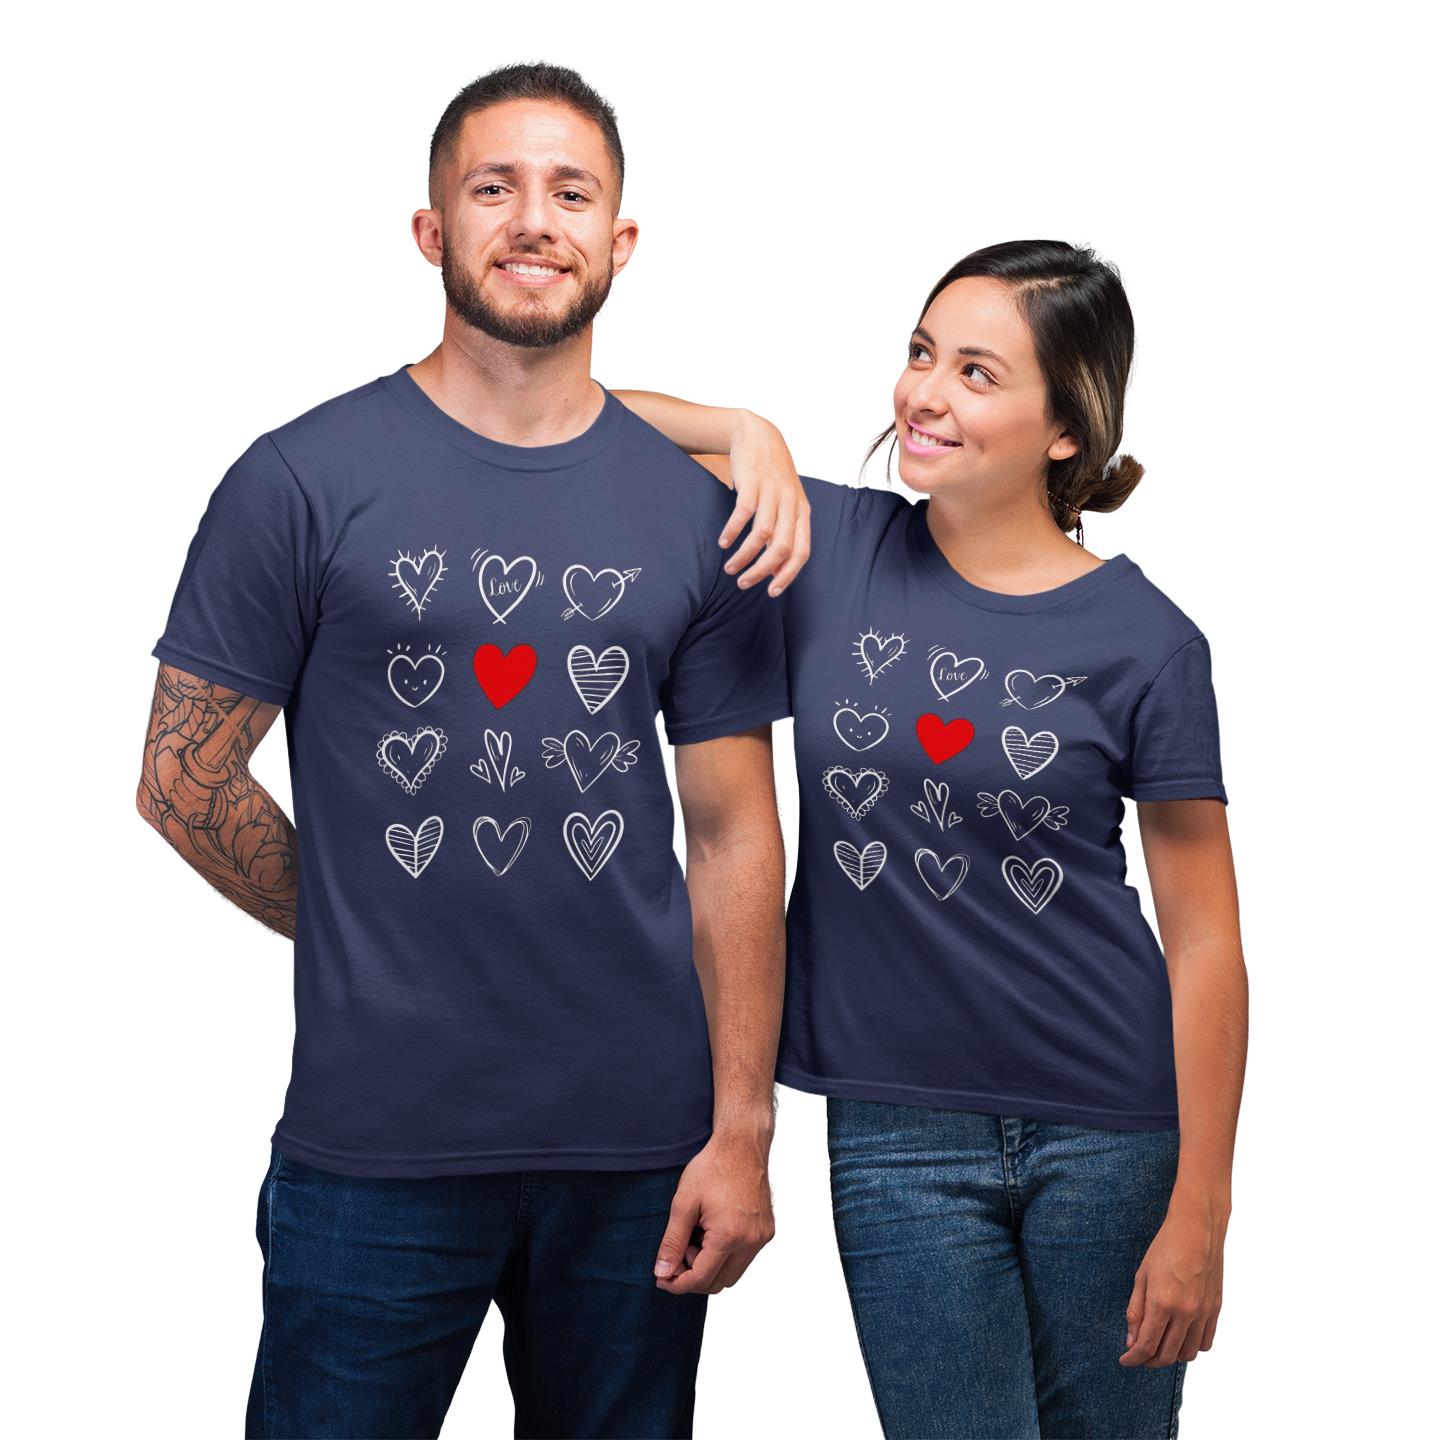 Shade Of Heart Love Shirt For Couples Lover His And Her Matching T-shirt